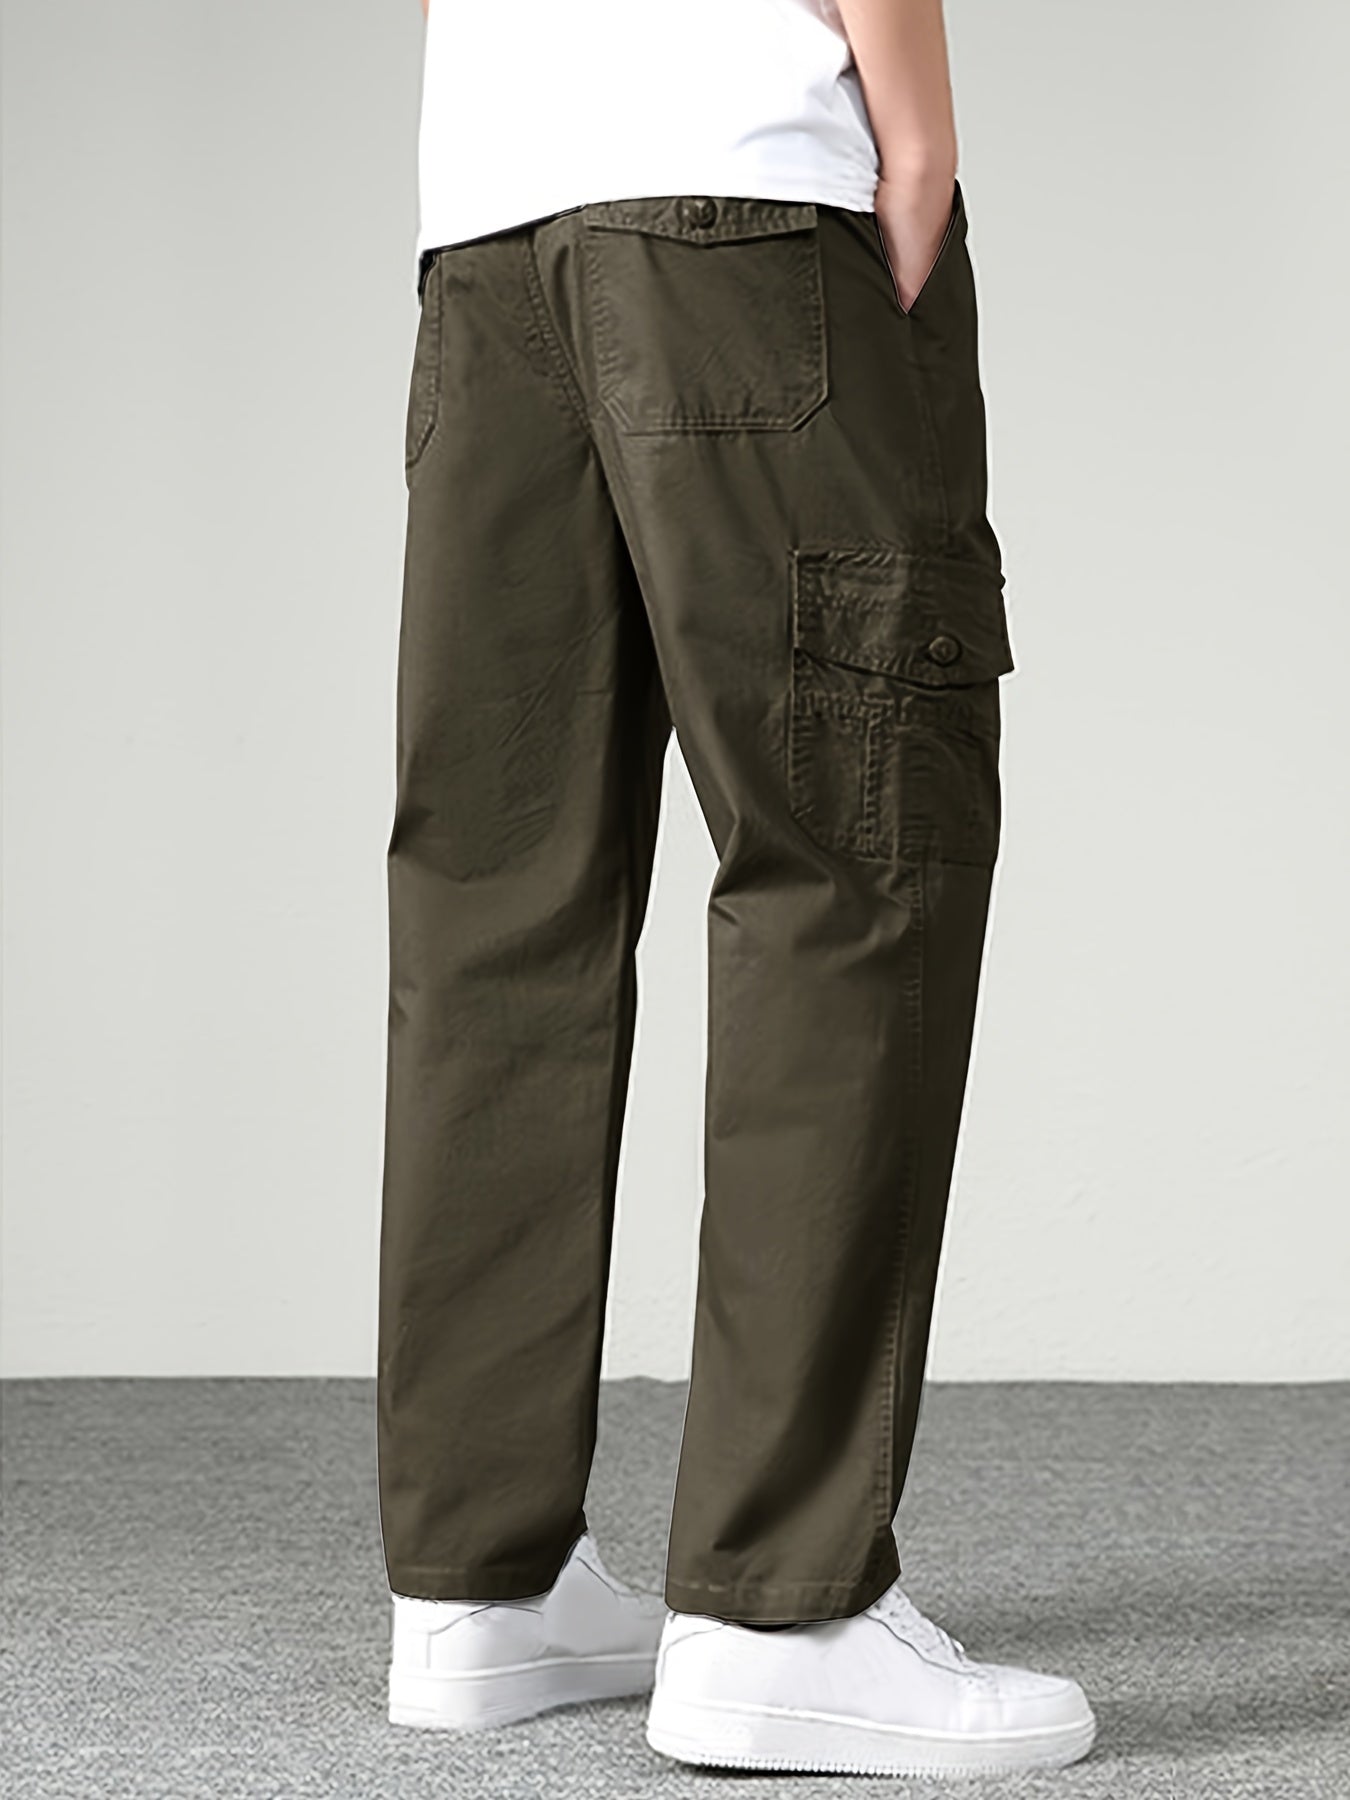 Vintage Men's Cargo Pants - Stylish Outdoor Bottoms with Pockets and Straight Leg